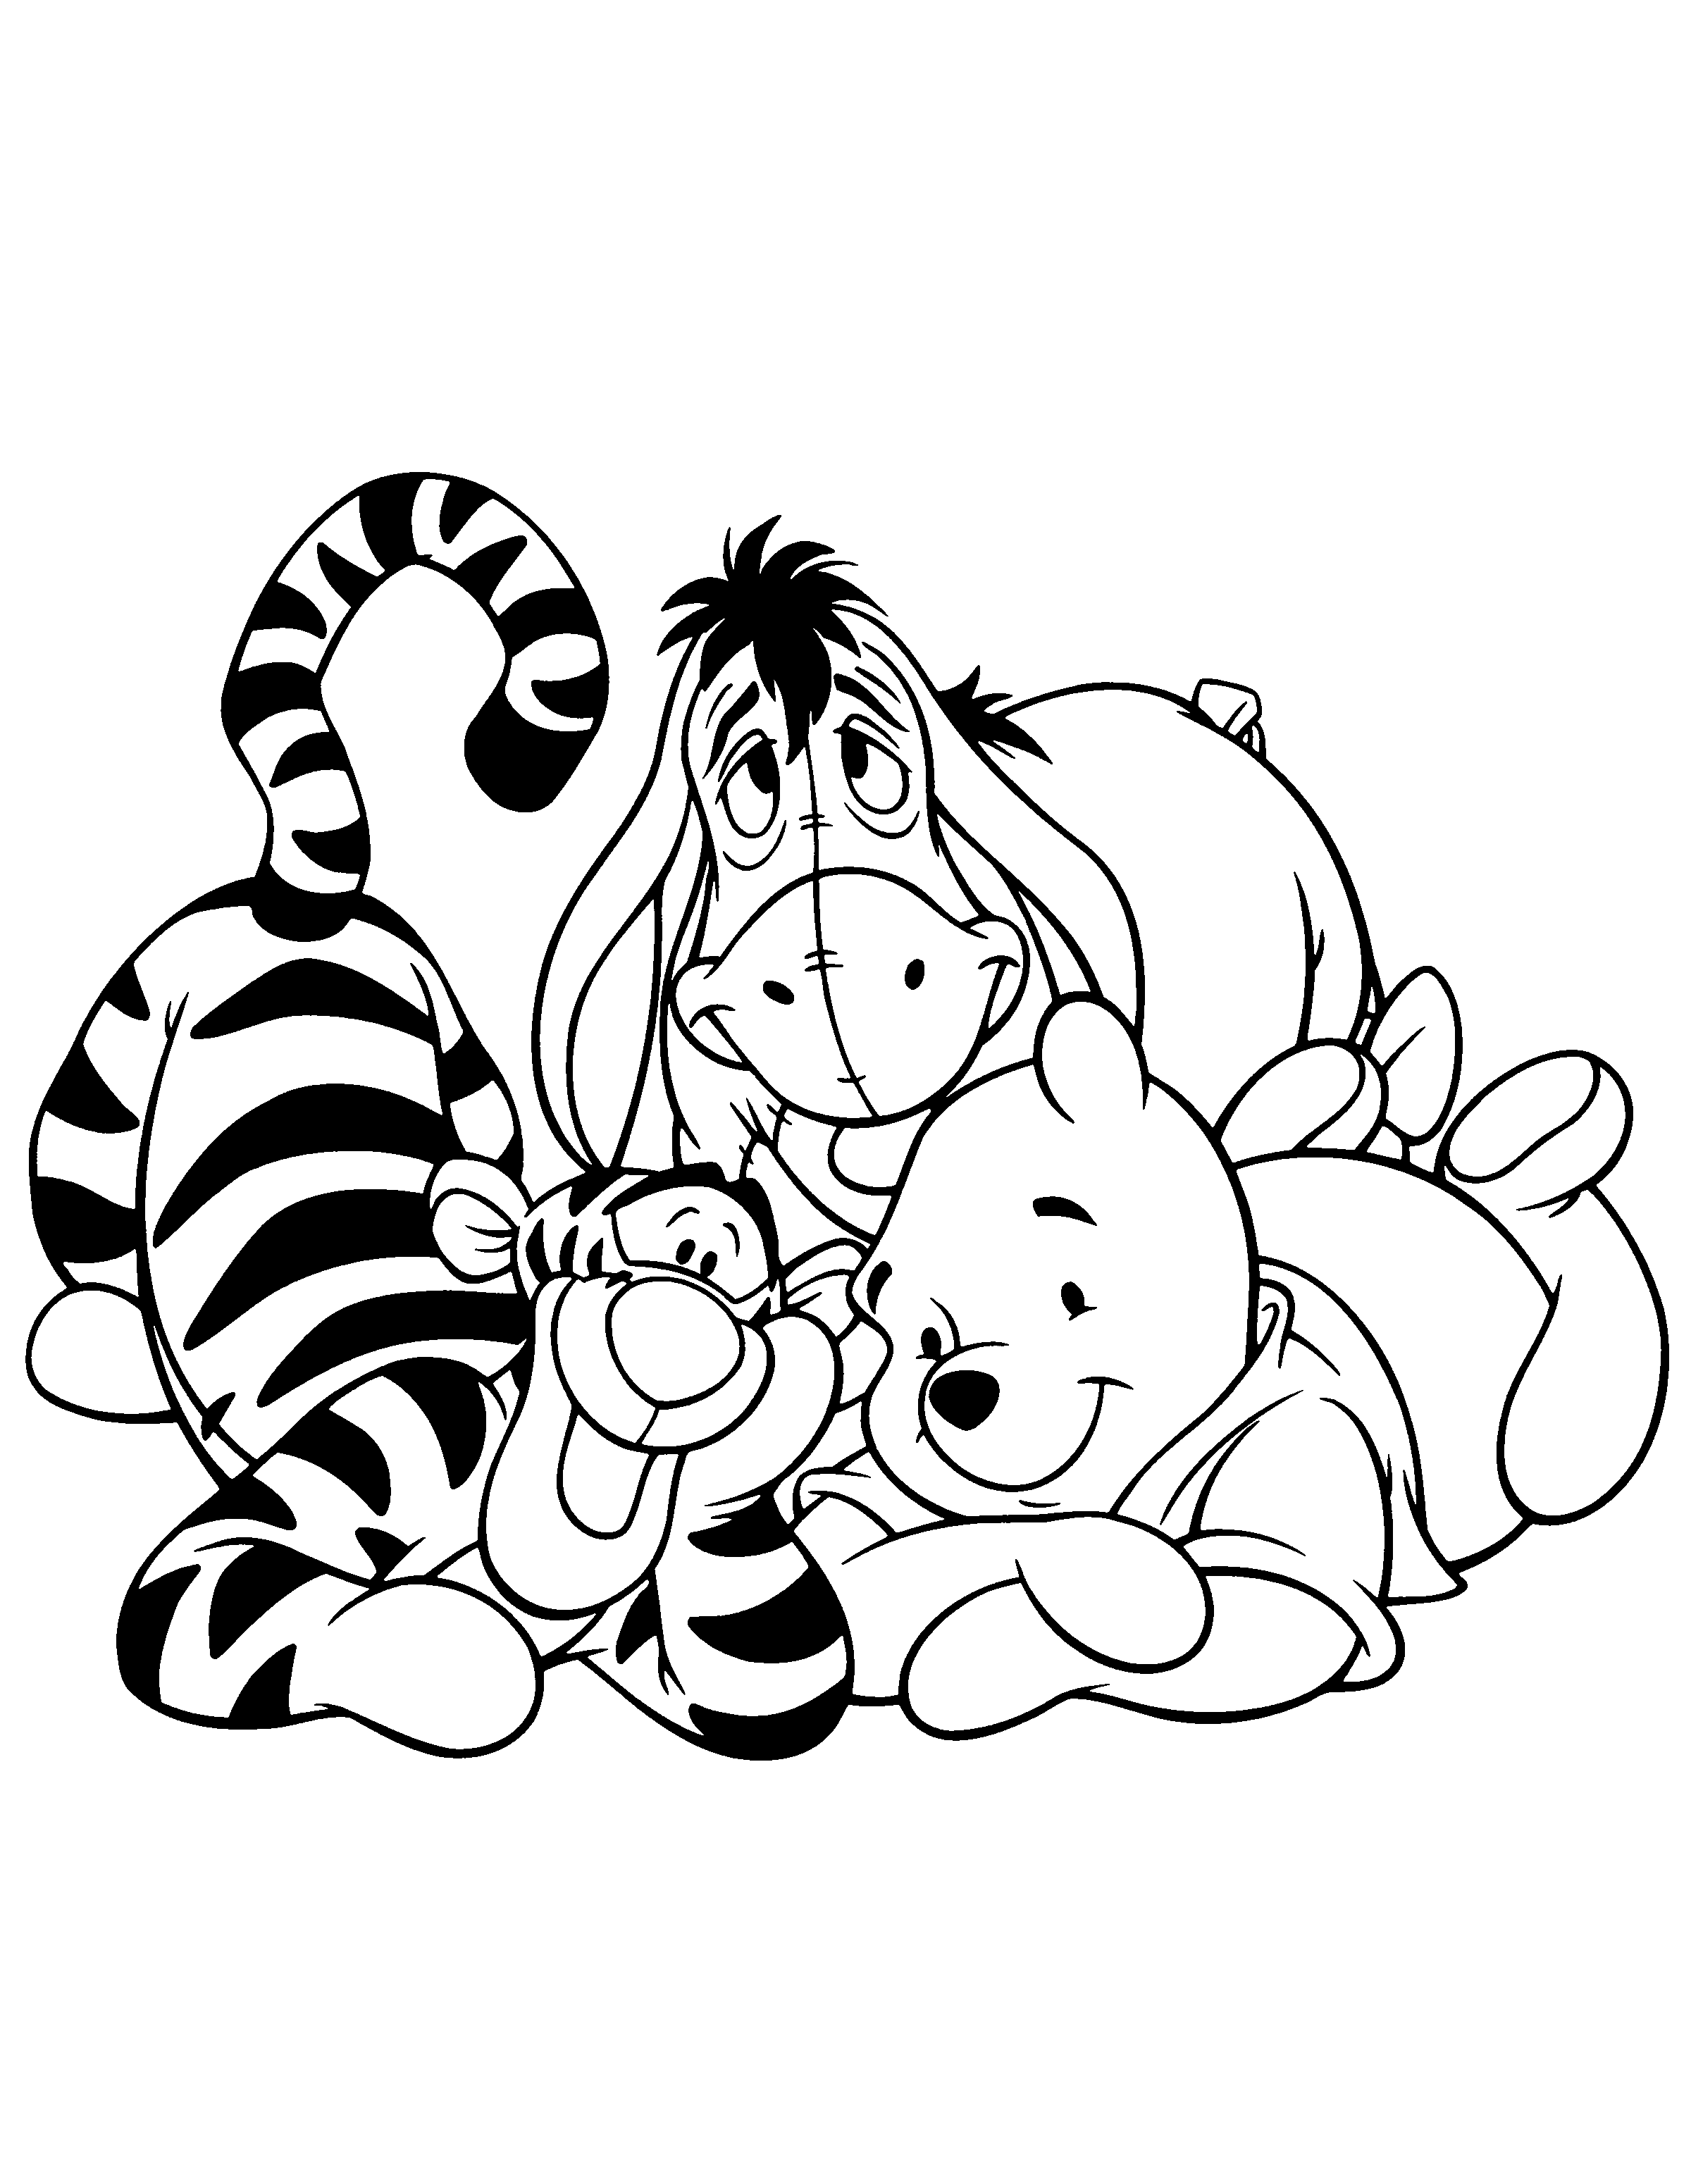 Winnie The Pooh Coloring Page Printable Bear Coloring Pages Coloring Pages Coloring B